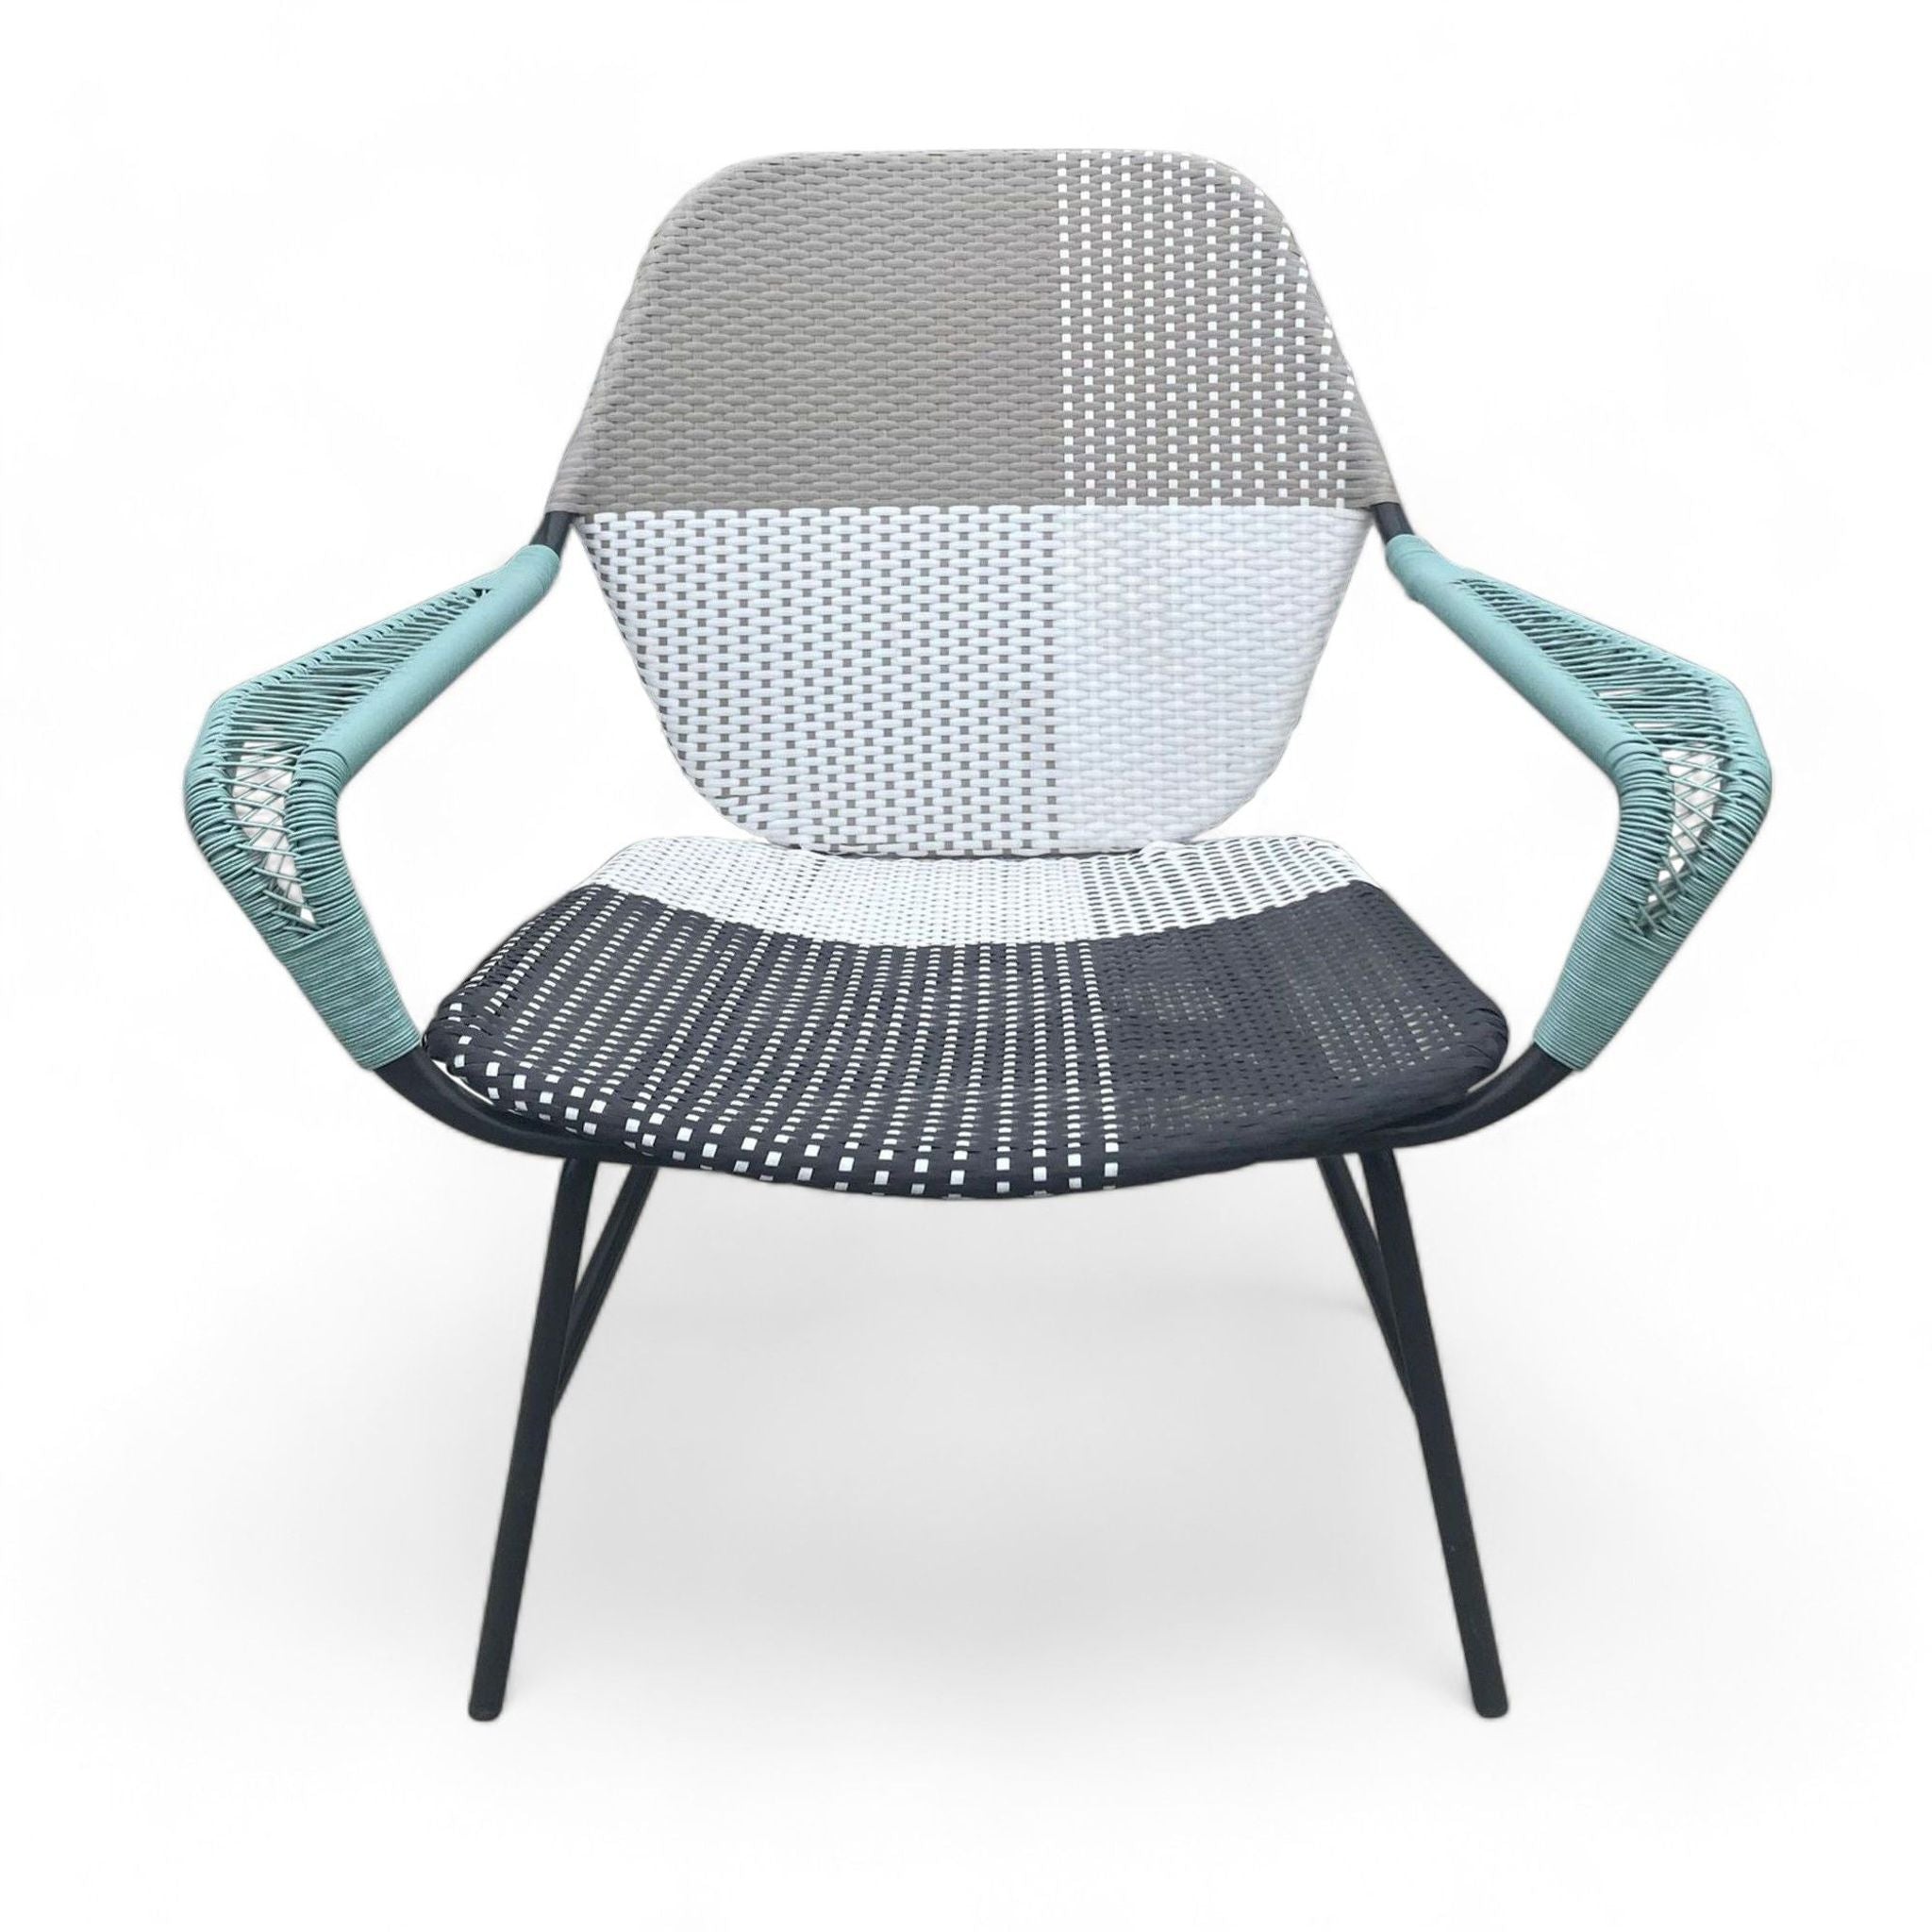 Alt text 1: Reperch brand color block resin wicker chair with a whimsical pattern and metal frame, designed for outdoor use.